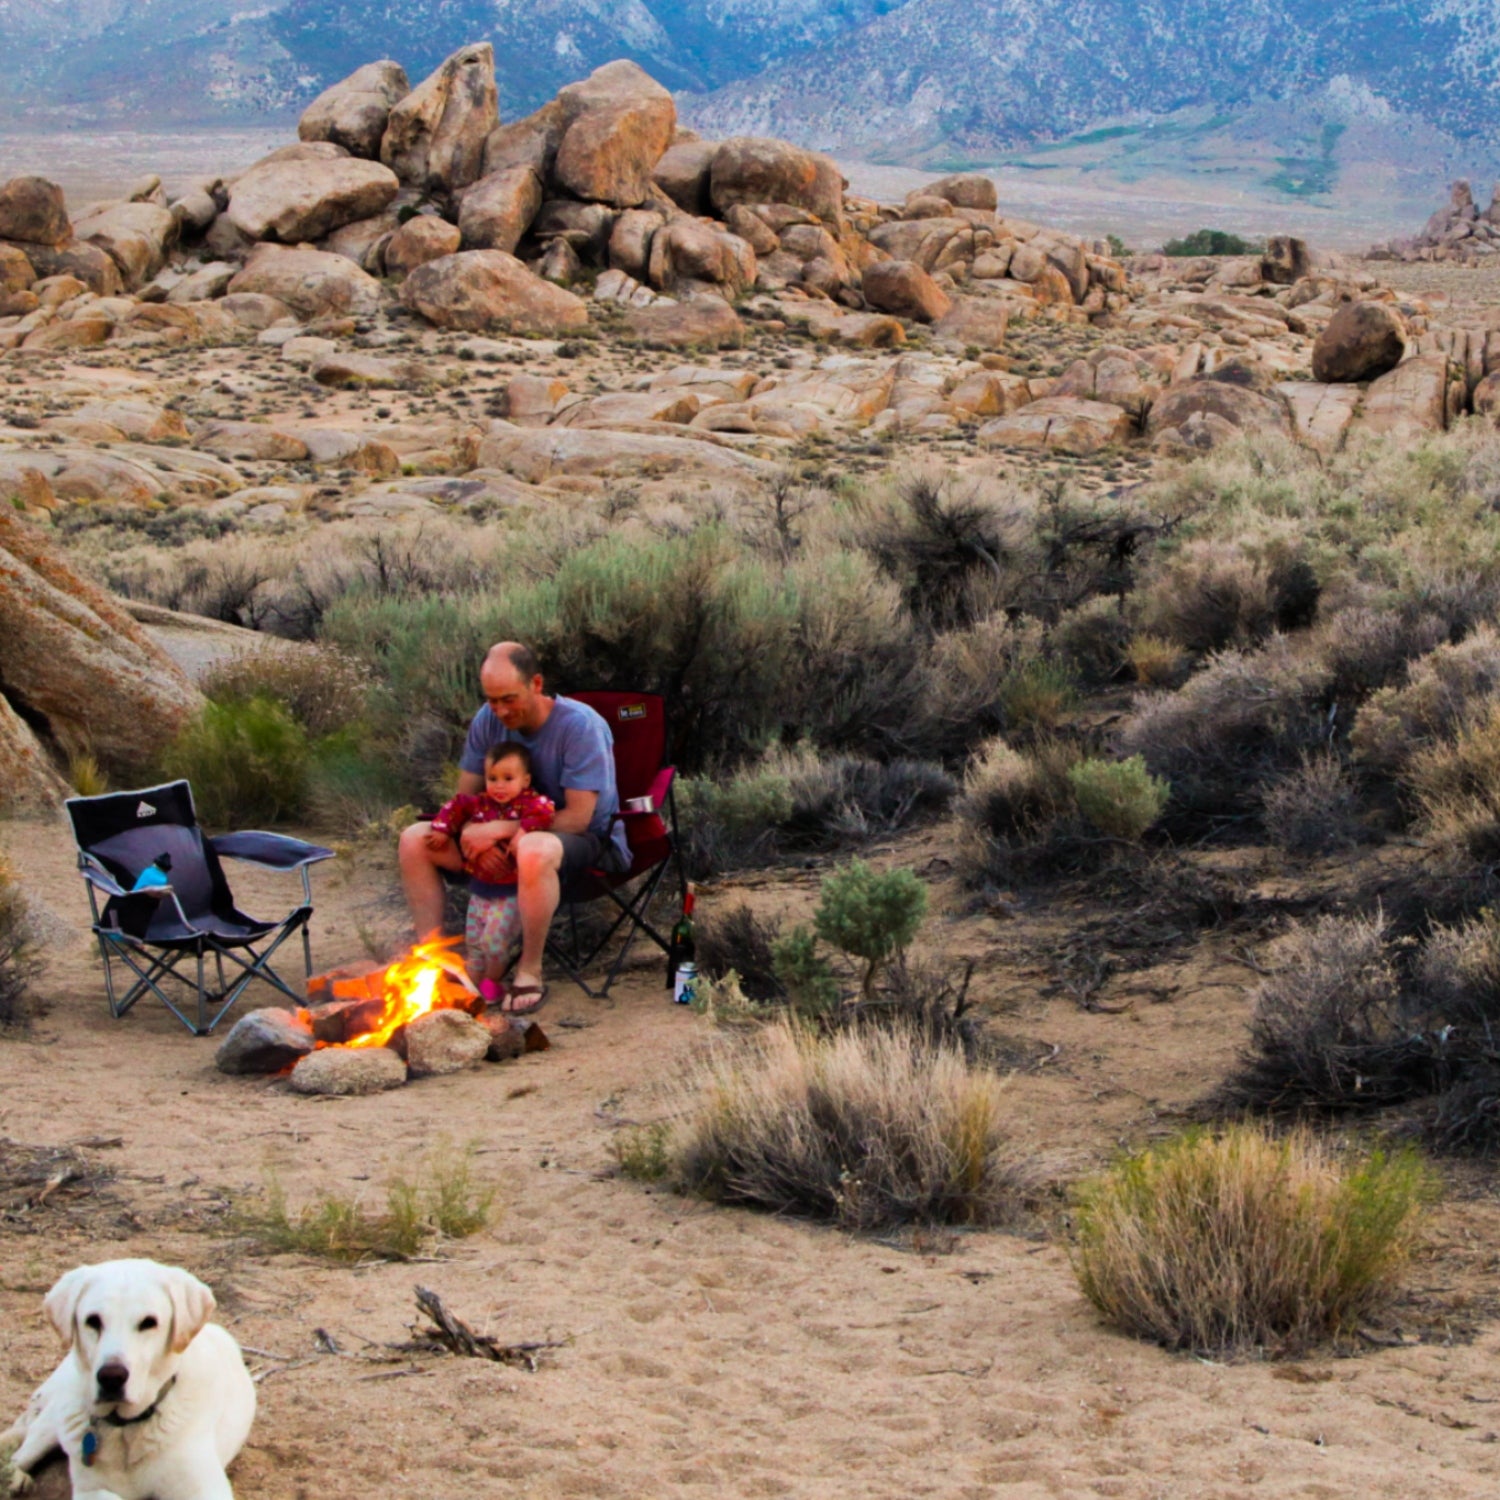 The Best Free Campsites in All 50 States